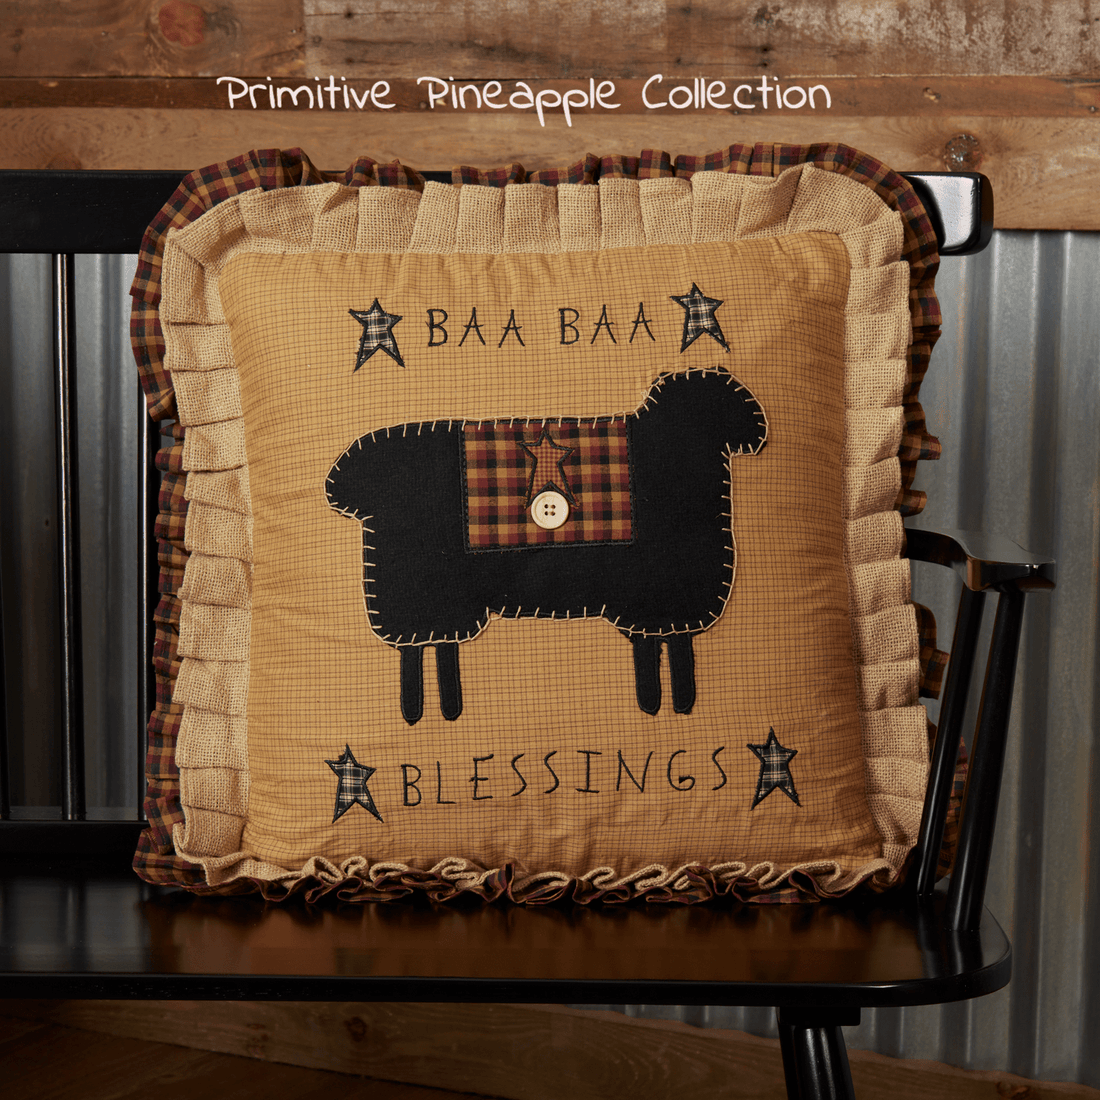 Primitive Farmhouse Heritage Farms Baa Baa Blessings Pillow w/ Fill 16x16&quot; - The Primitive Pineapple Collection